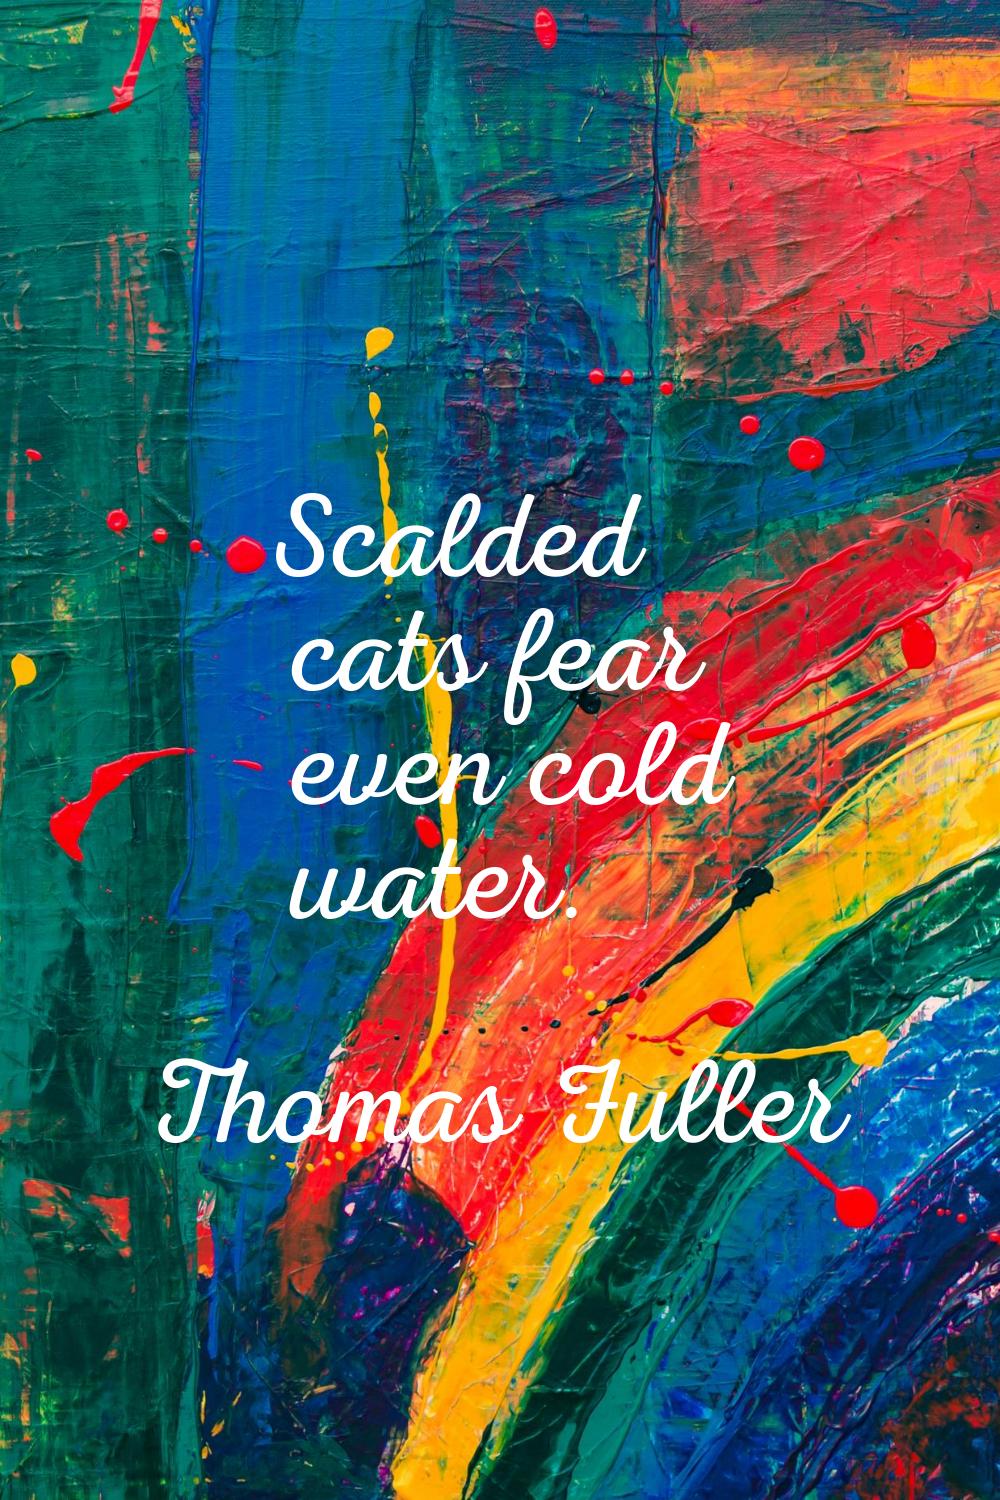 Scalded cats fear even cold water.